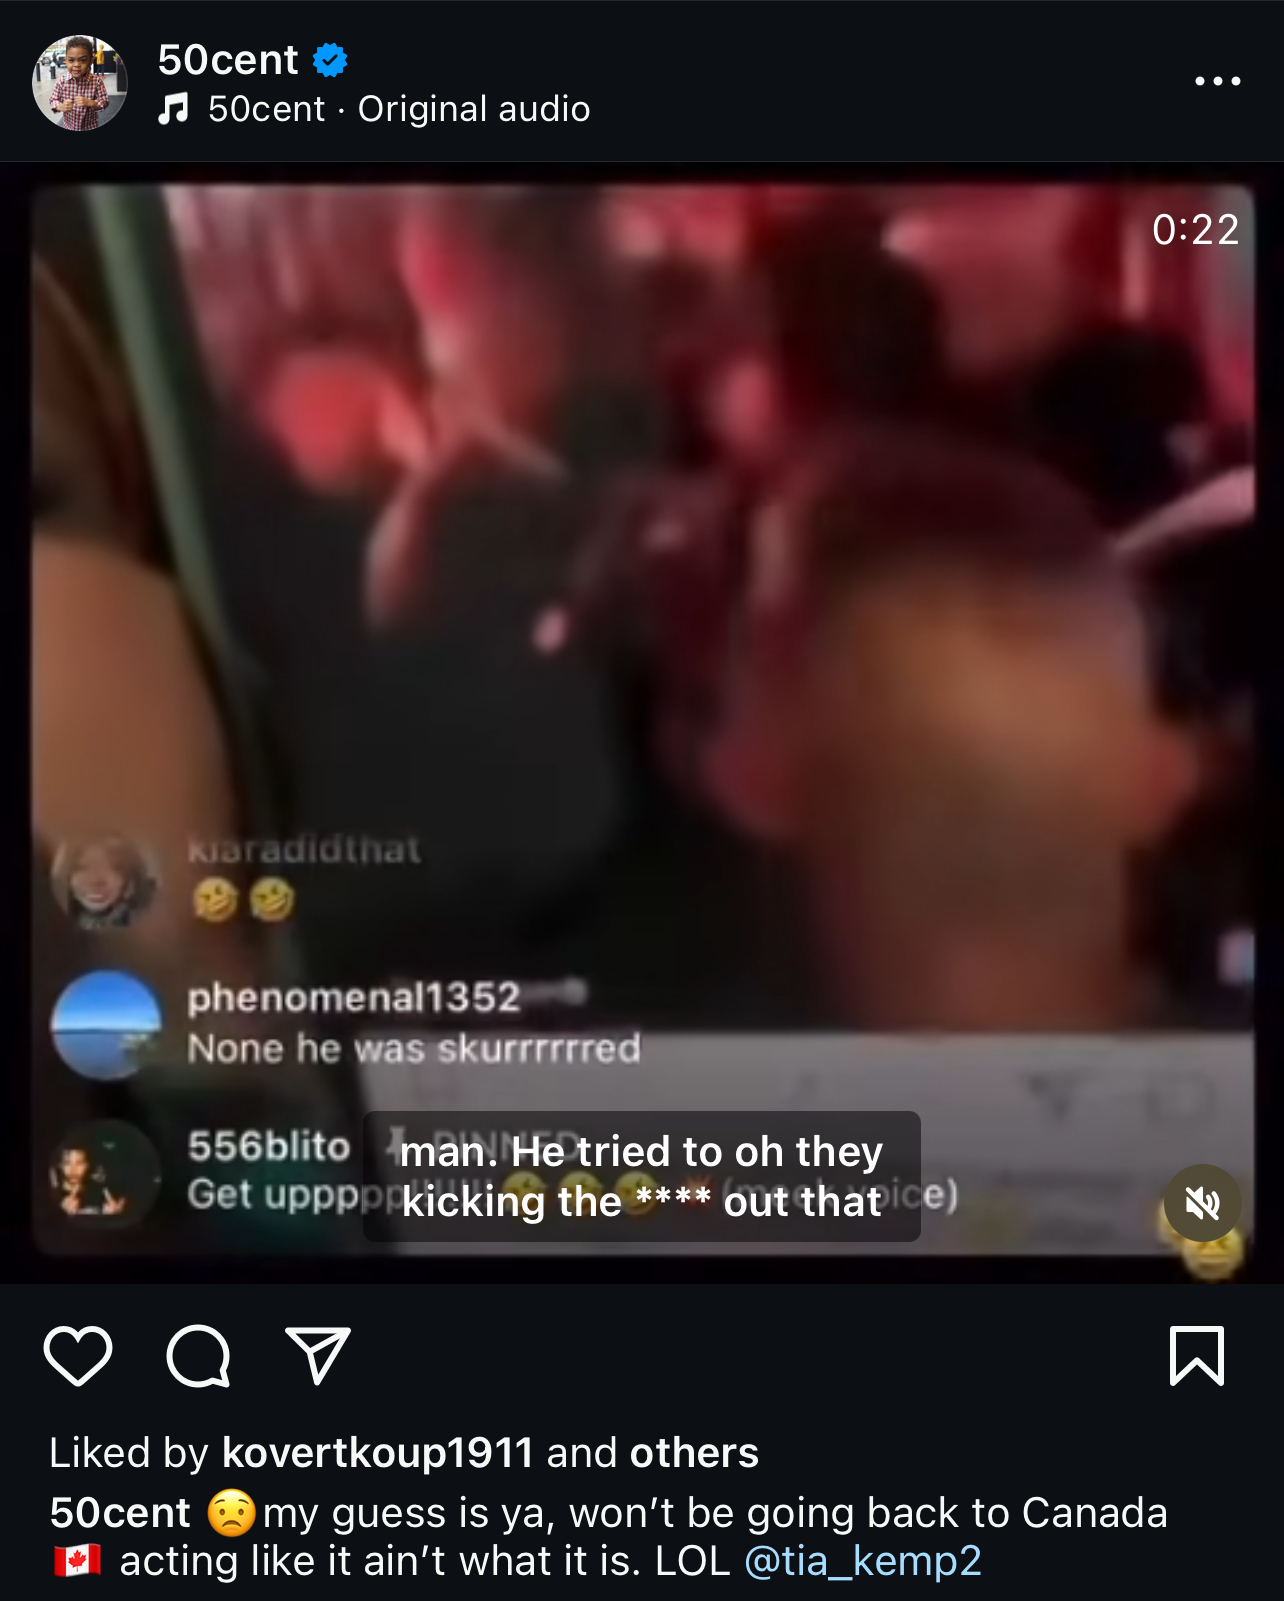 Screenshot of 50 Cent&#x27;s Instagram post with a video showing a chaotic scene. Caption suggests he won&#x27;t be returning to Canada, implying an incident occurred